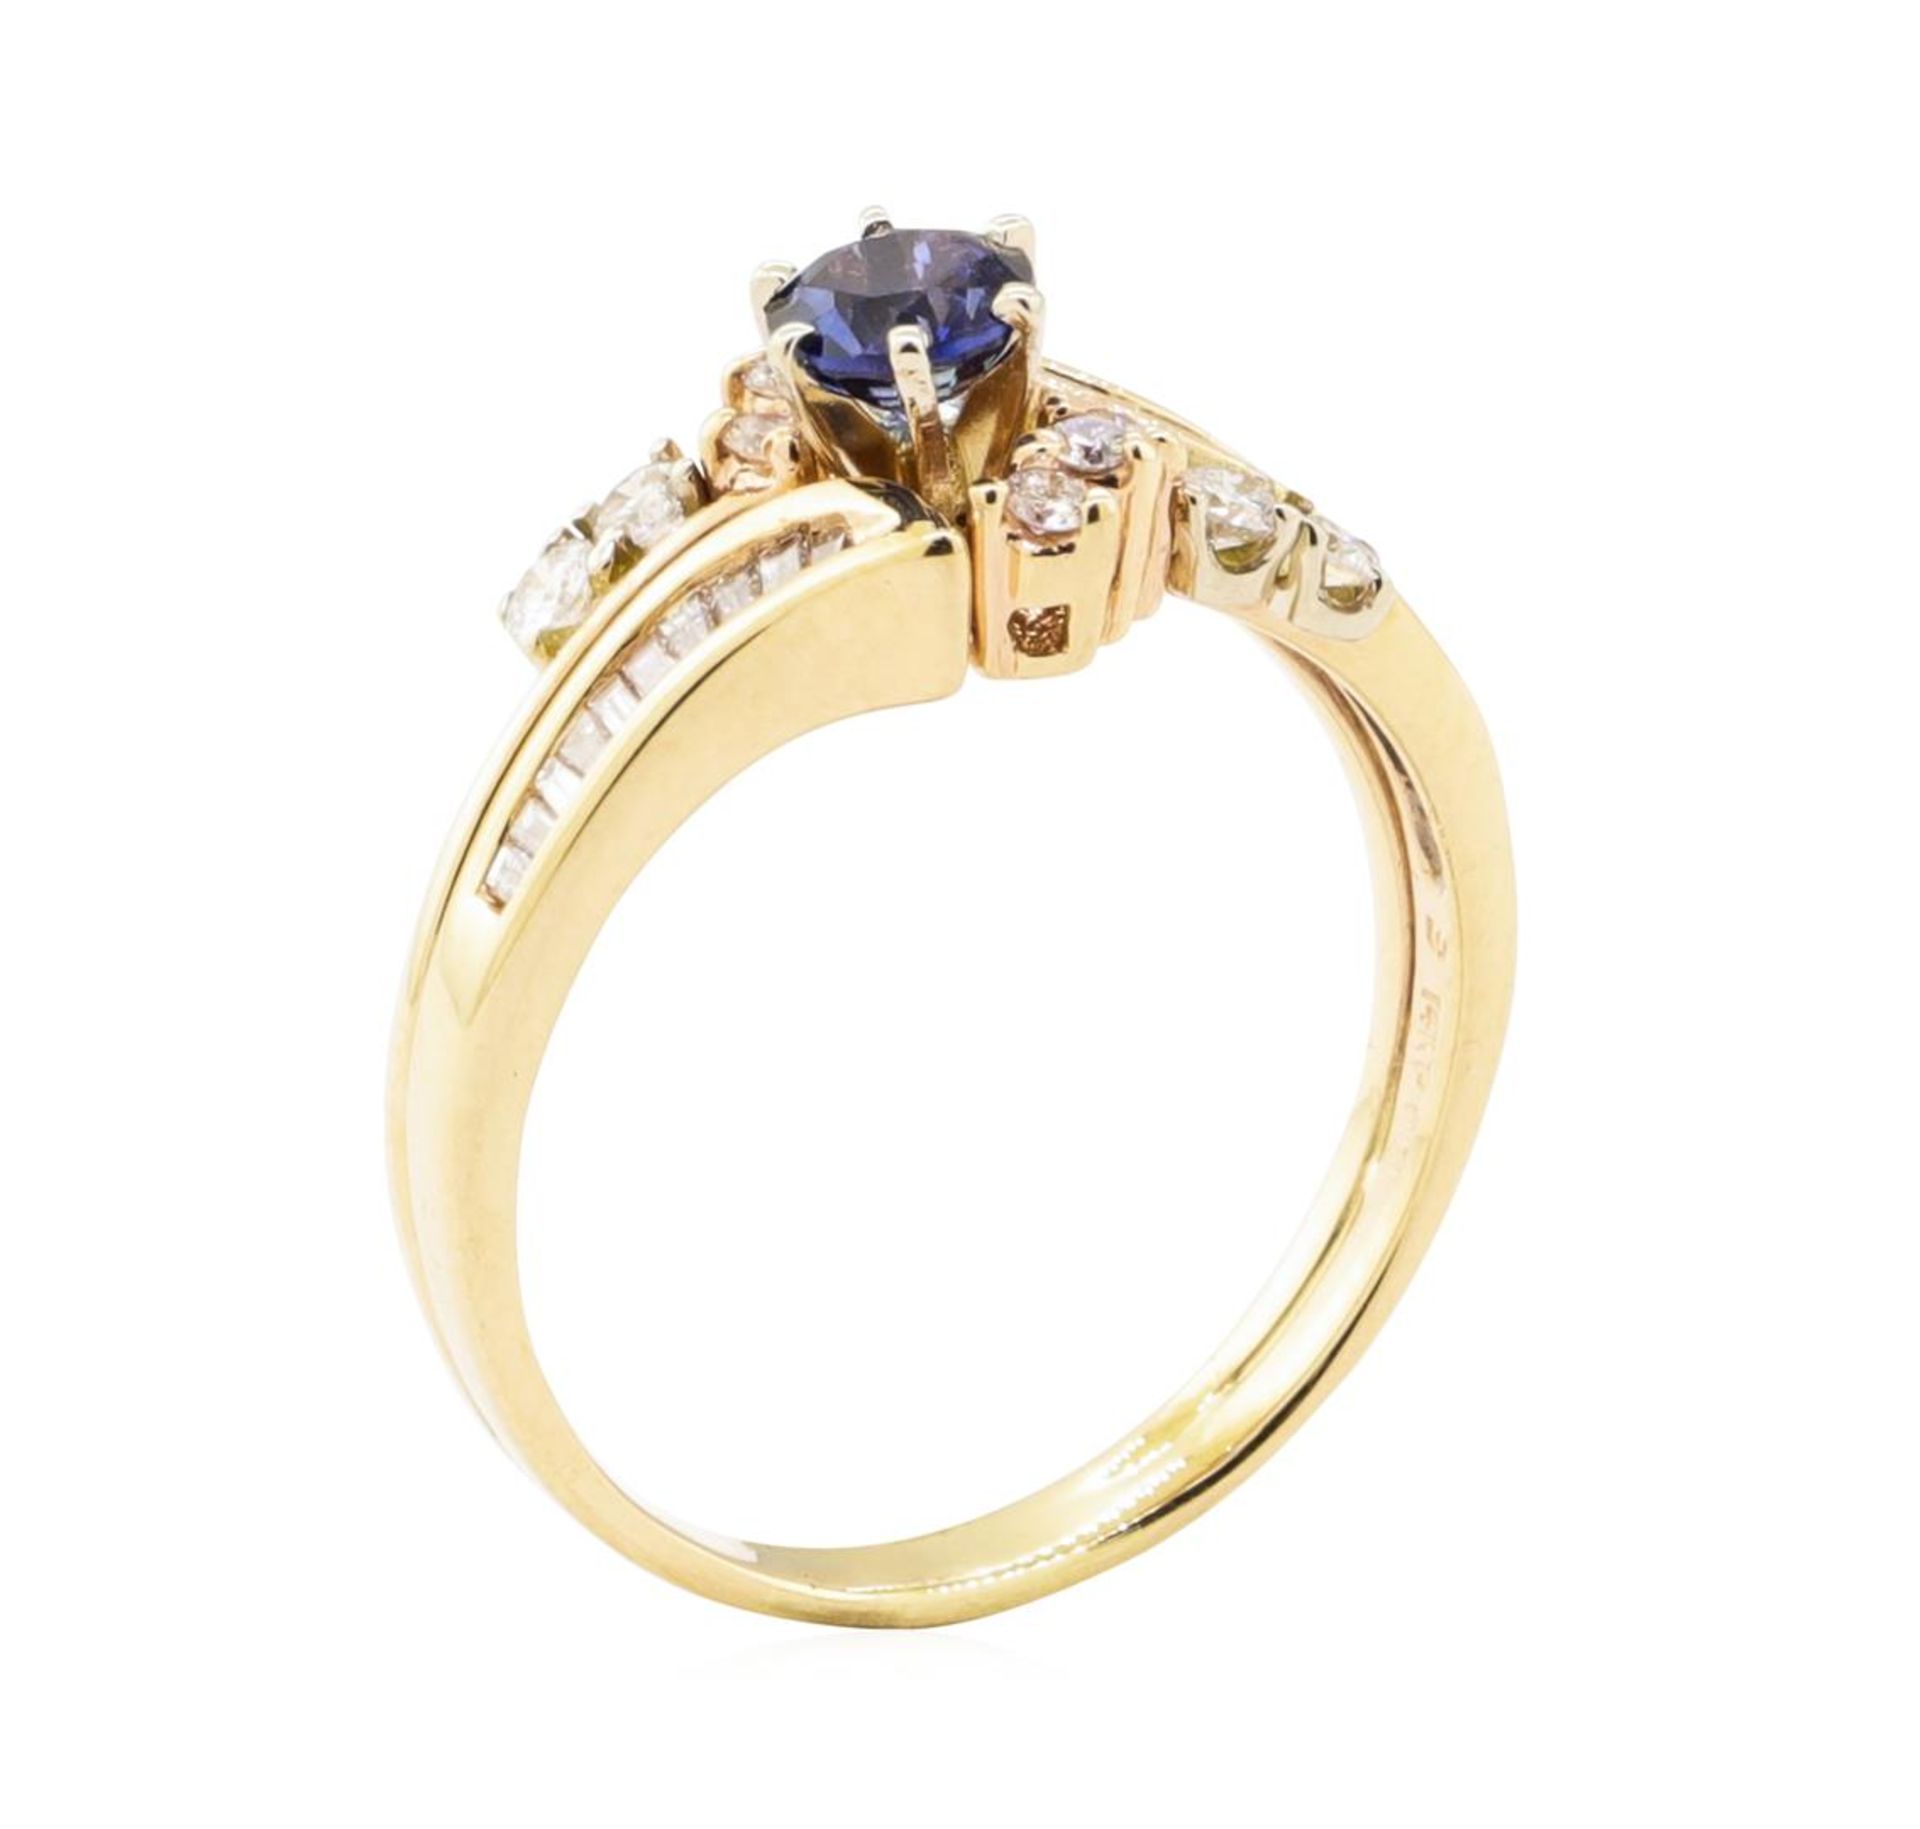 1.10 ctw Blue Sapphire and Diamond Ring - 14KT Yellow Gold - Image 4 of 4